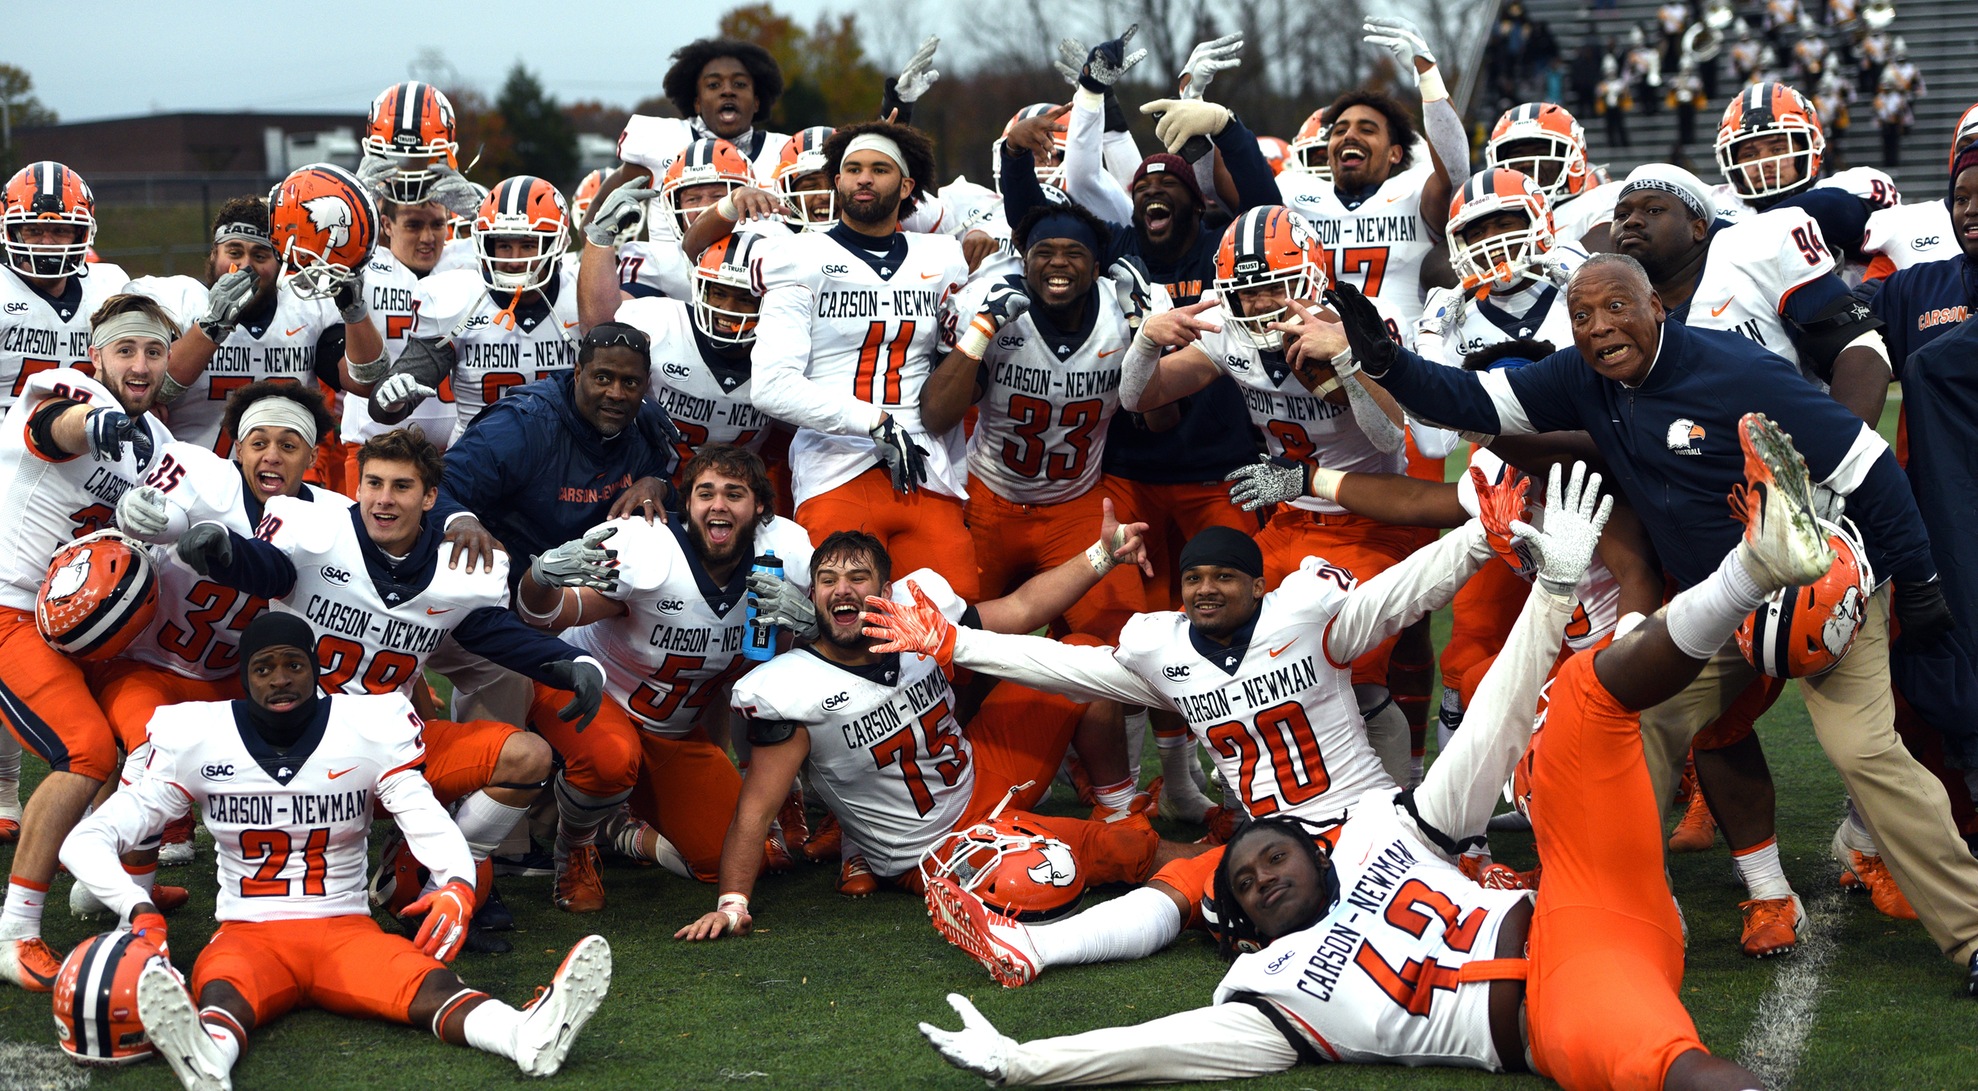 Stout defense carries No. 24 Carson-Newman into second round, 17-9 over No. 11 Bowie State